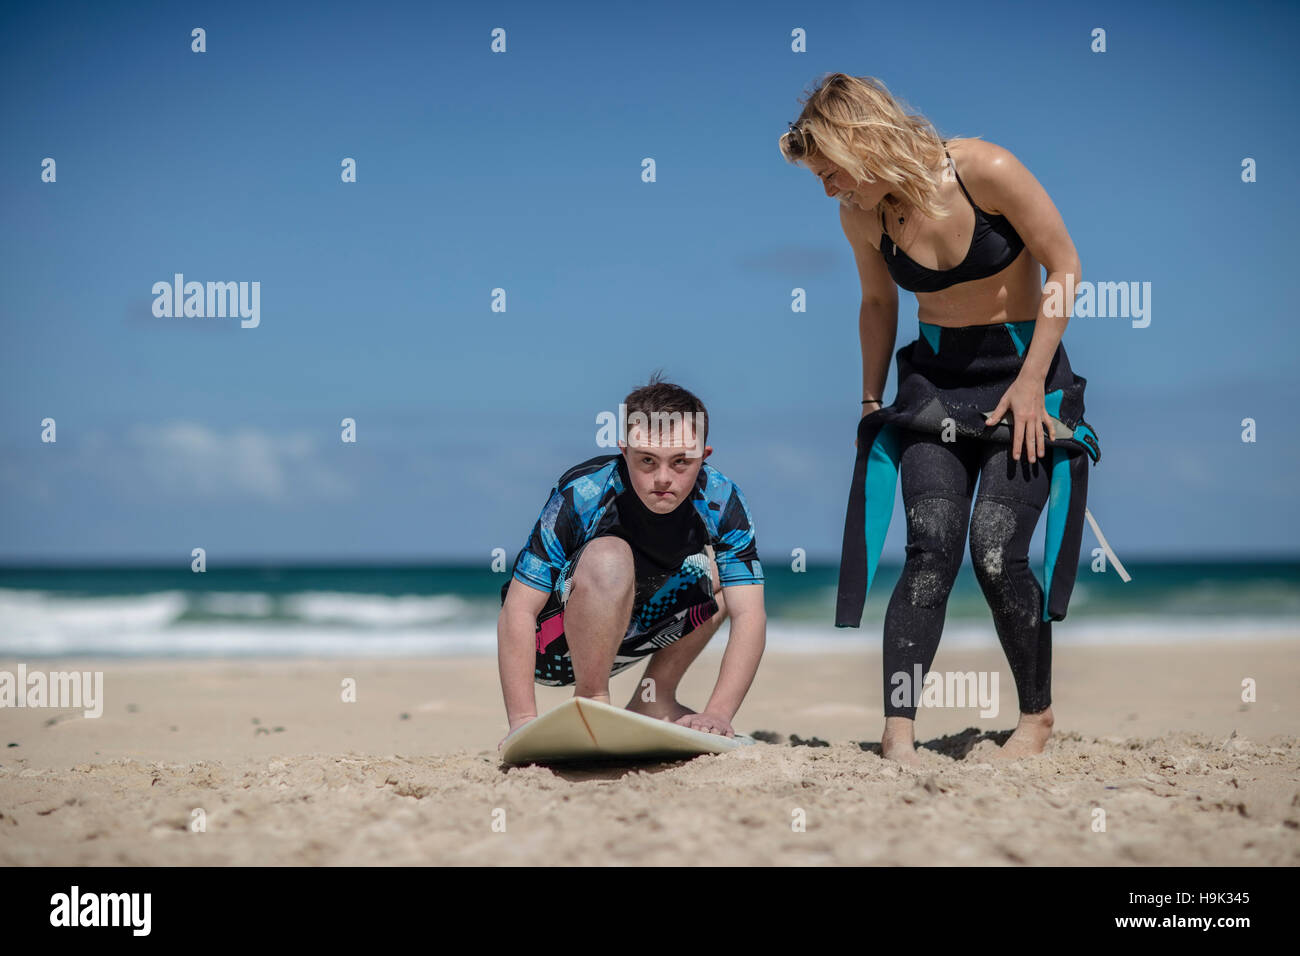 Teenage boy with down syndrome having surf lessons on beach Stock Photo